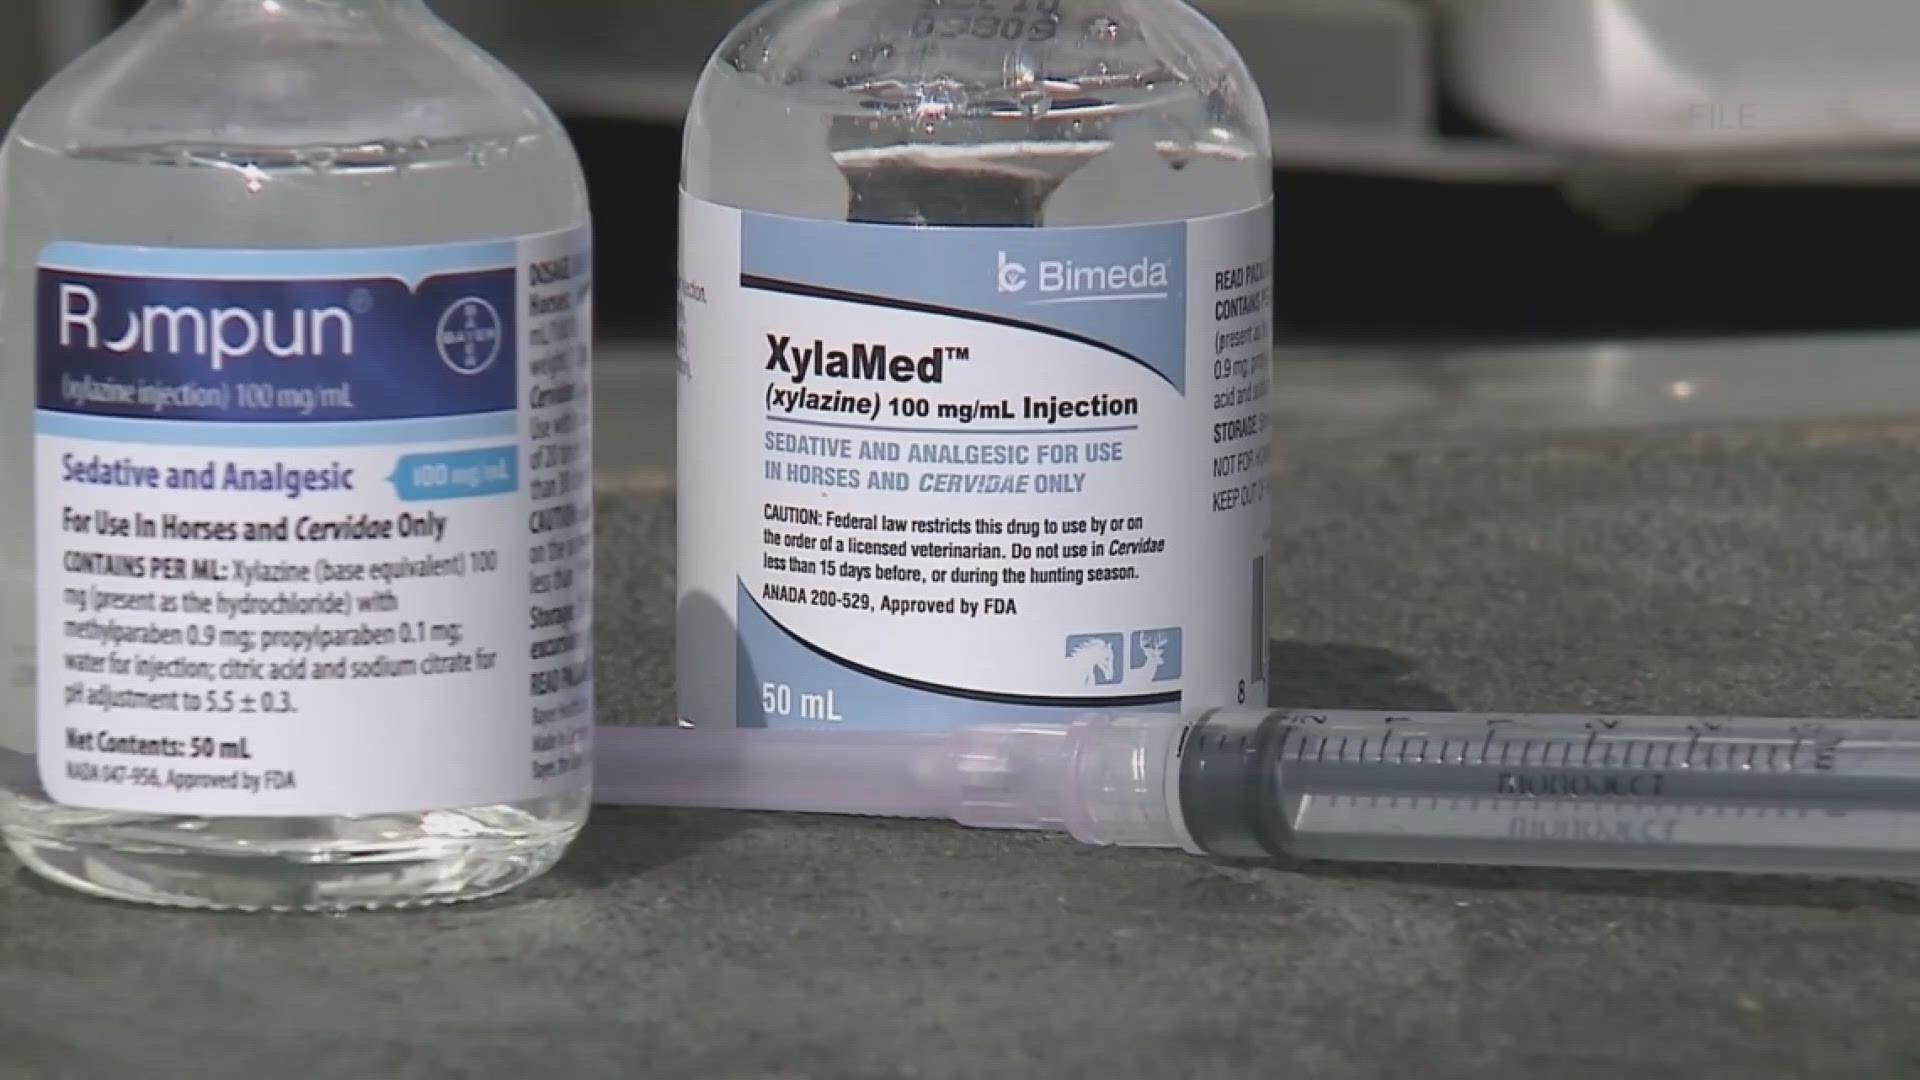 "In the day when we were all kids, we knew heroin was the worst thing, and today it's fentanyl, it's tranq, it's xylazine," one woman in recovery said.